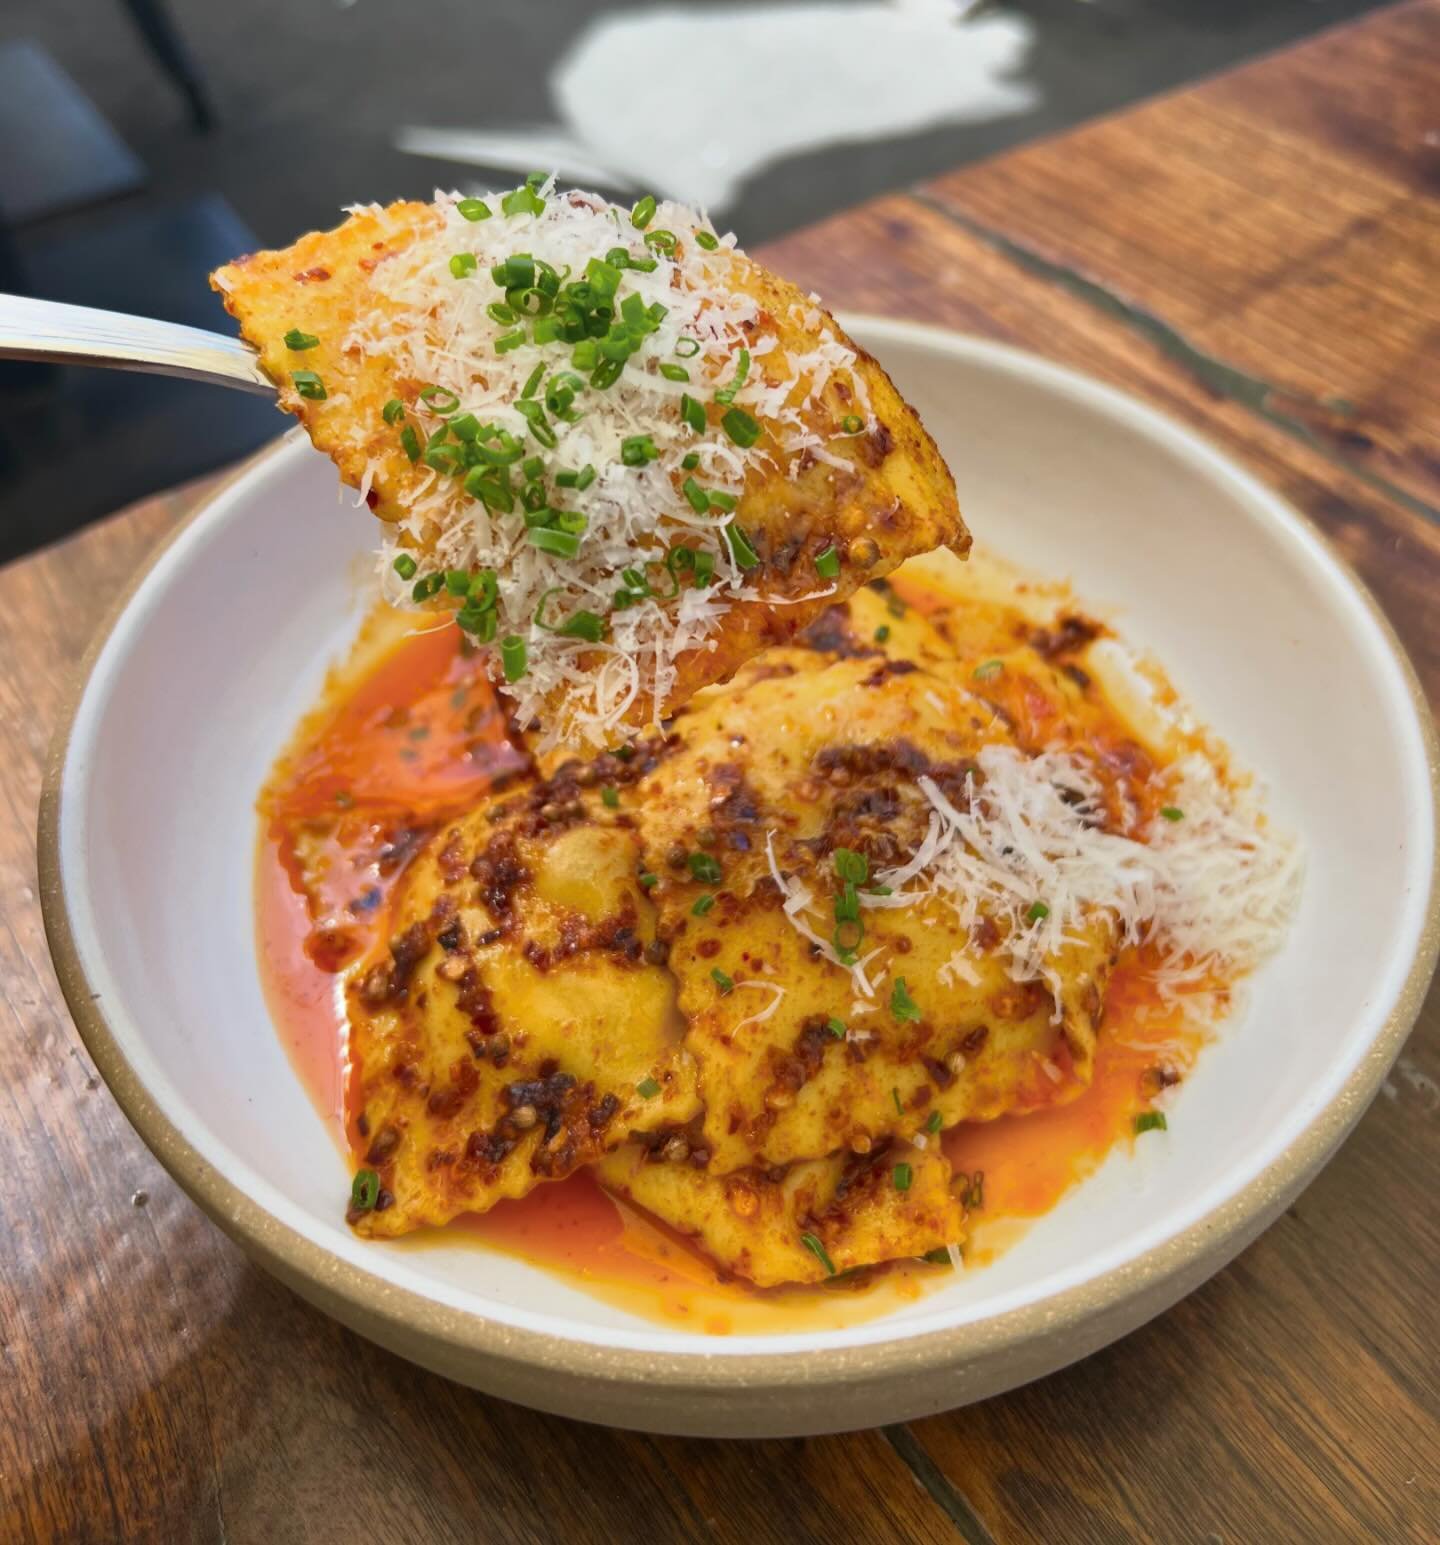 Pasta Wednesday Special! 🍝 

Ravioli Stuffed with Fresh Mozzarella, Roasted Bell Pepper, Corn and Chives. In a Brown Butter Sauce with Chili Crisp and Parmigiano Reggiano 

Tonight only! 
&bull; Happy hour 3-6 🍕 🍻 🍷 🌱
&bull; Take-Out is always a